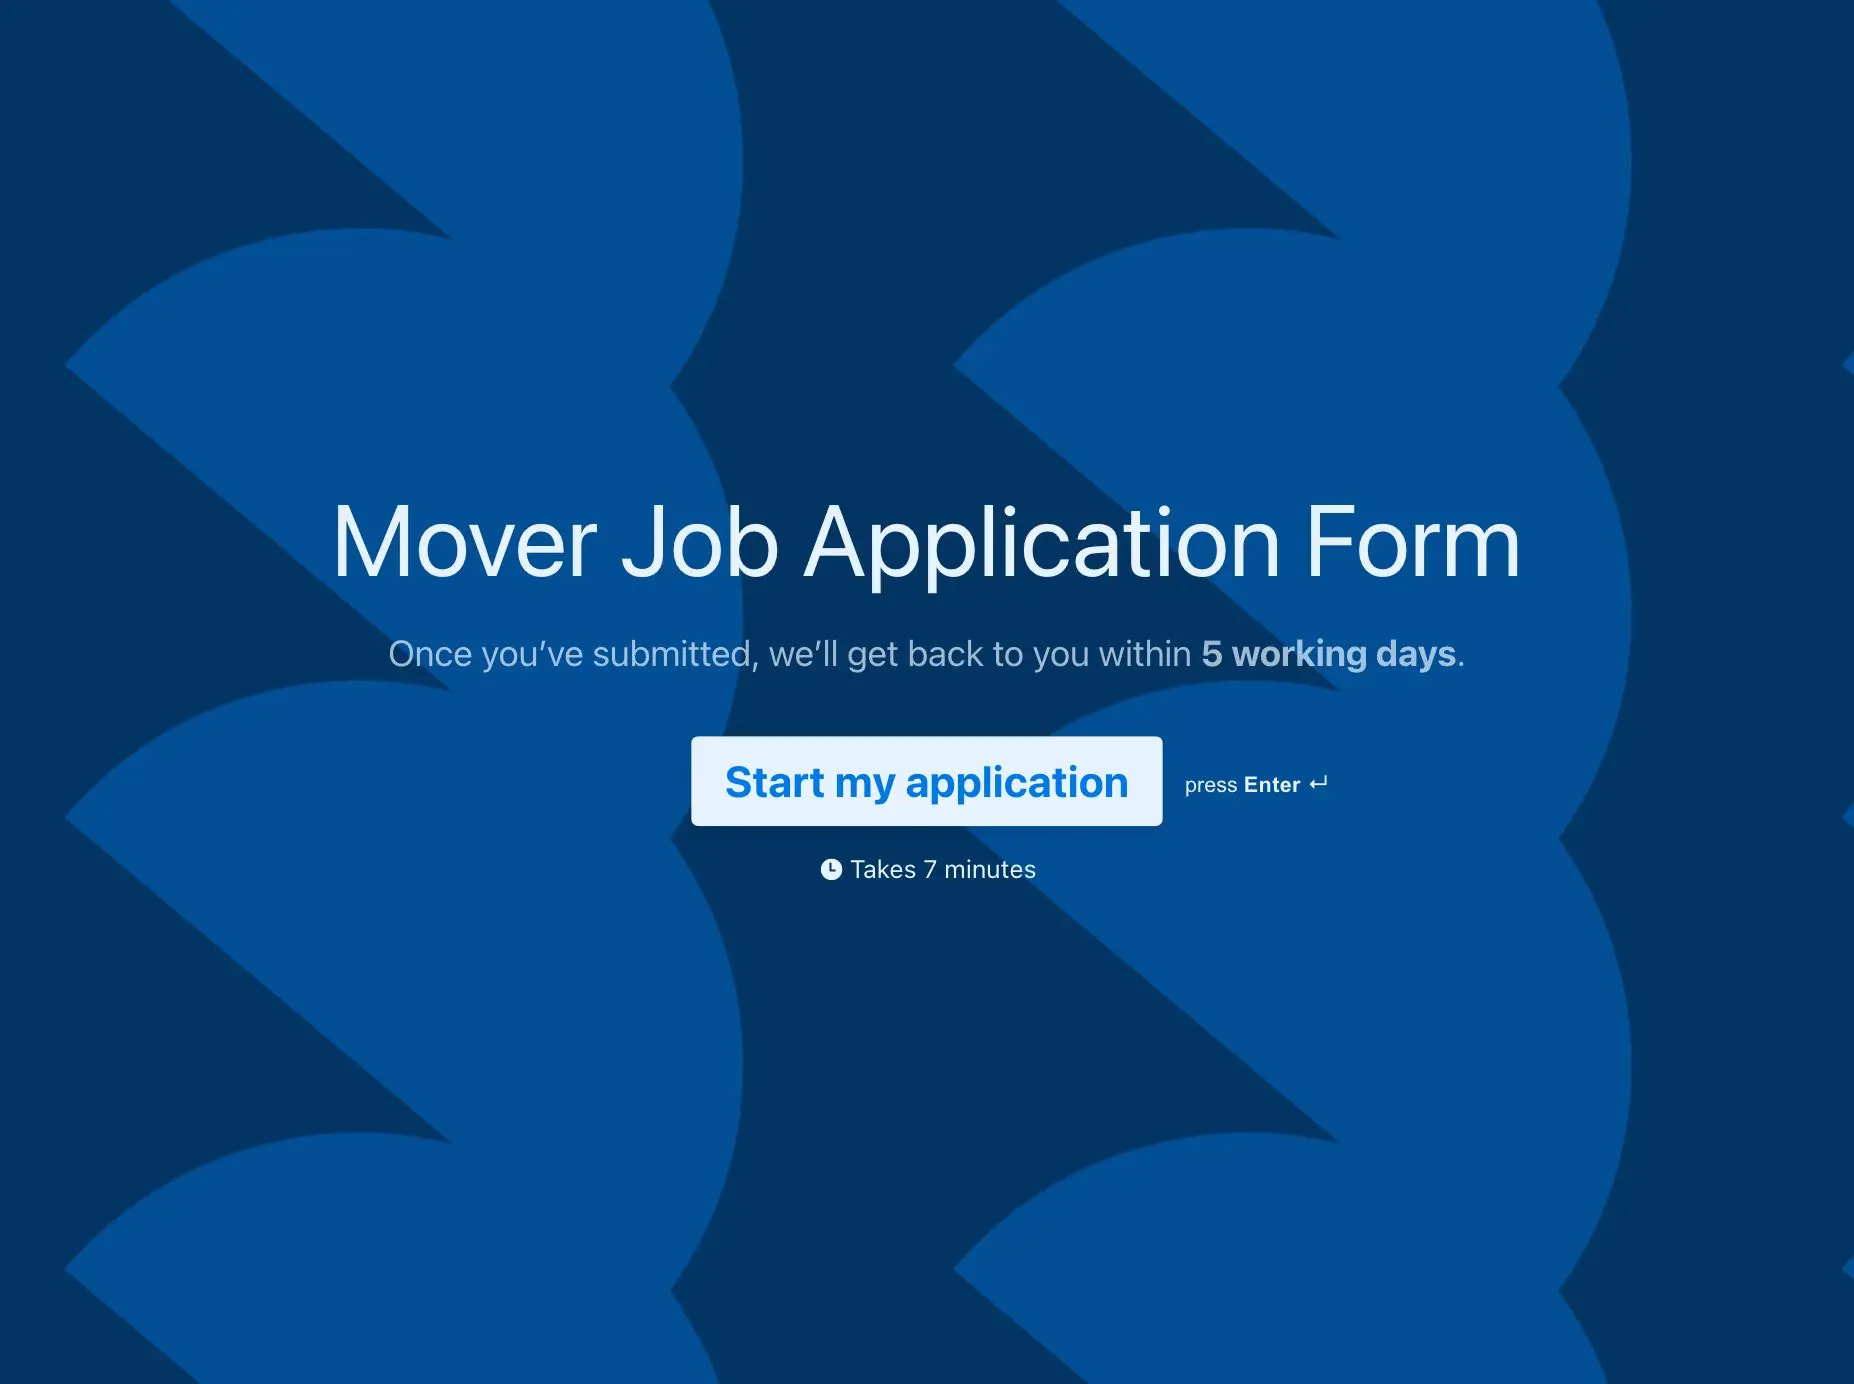 Mover Job Application Form Template Hero